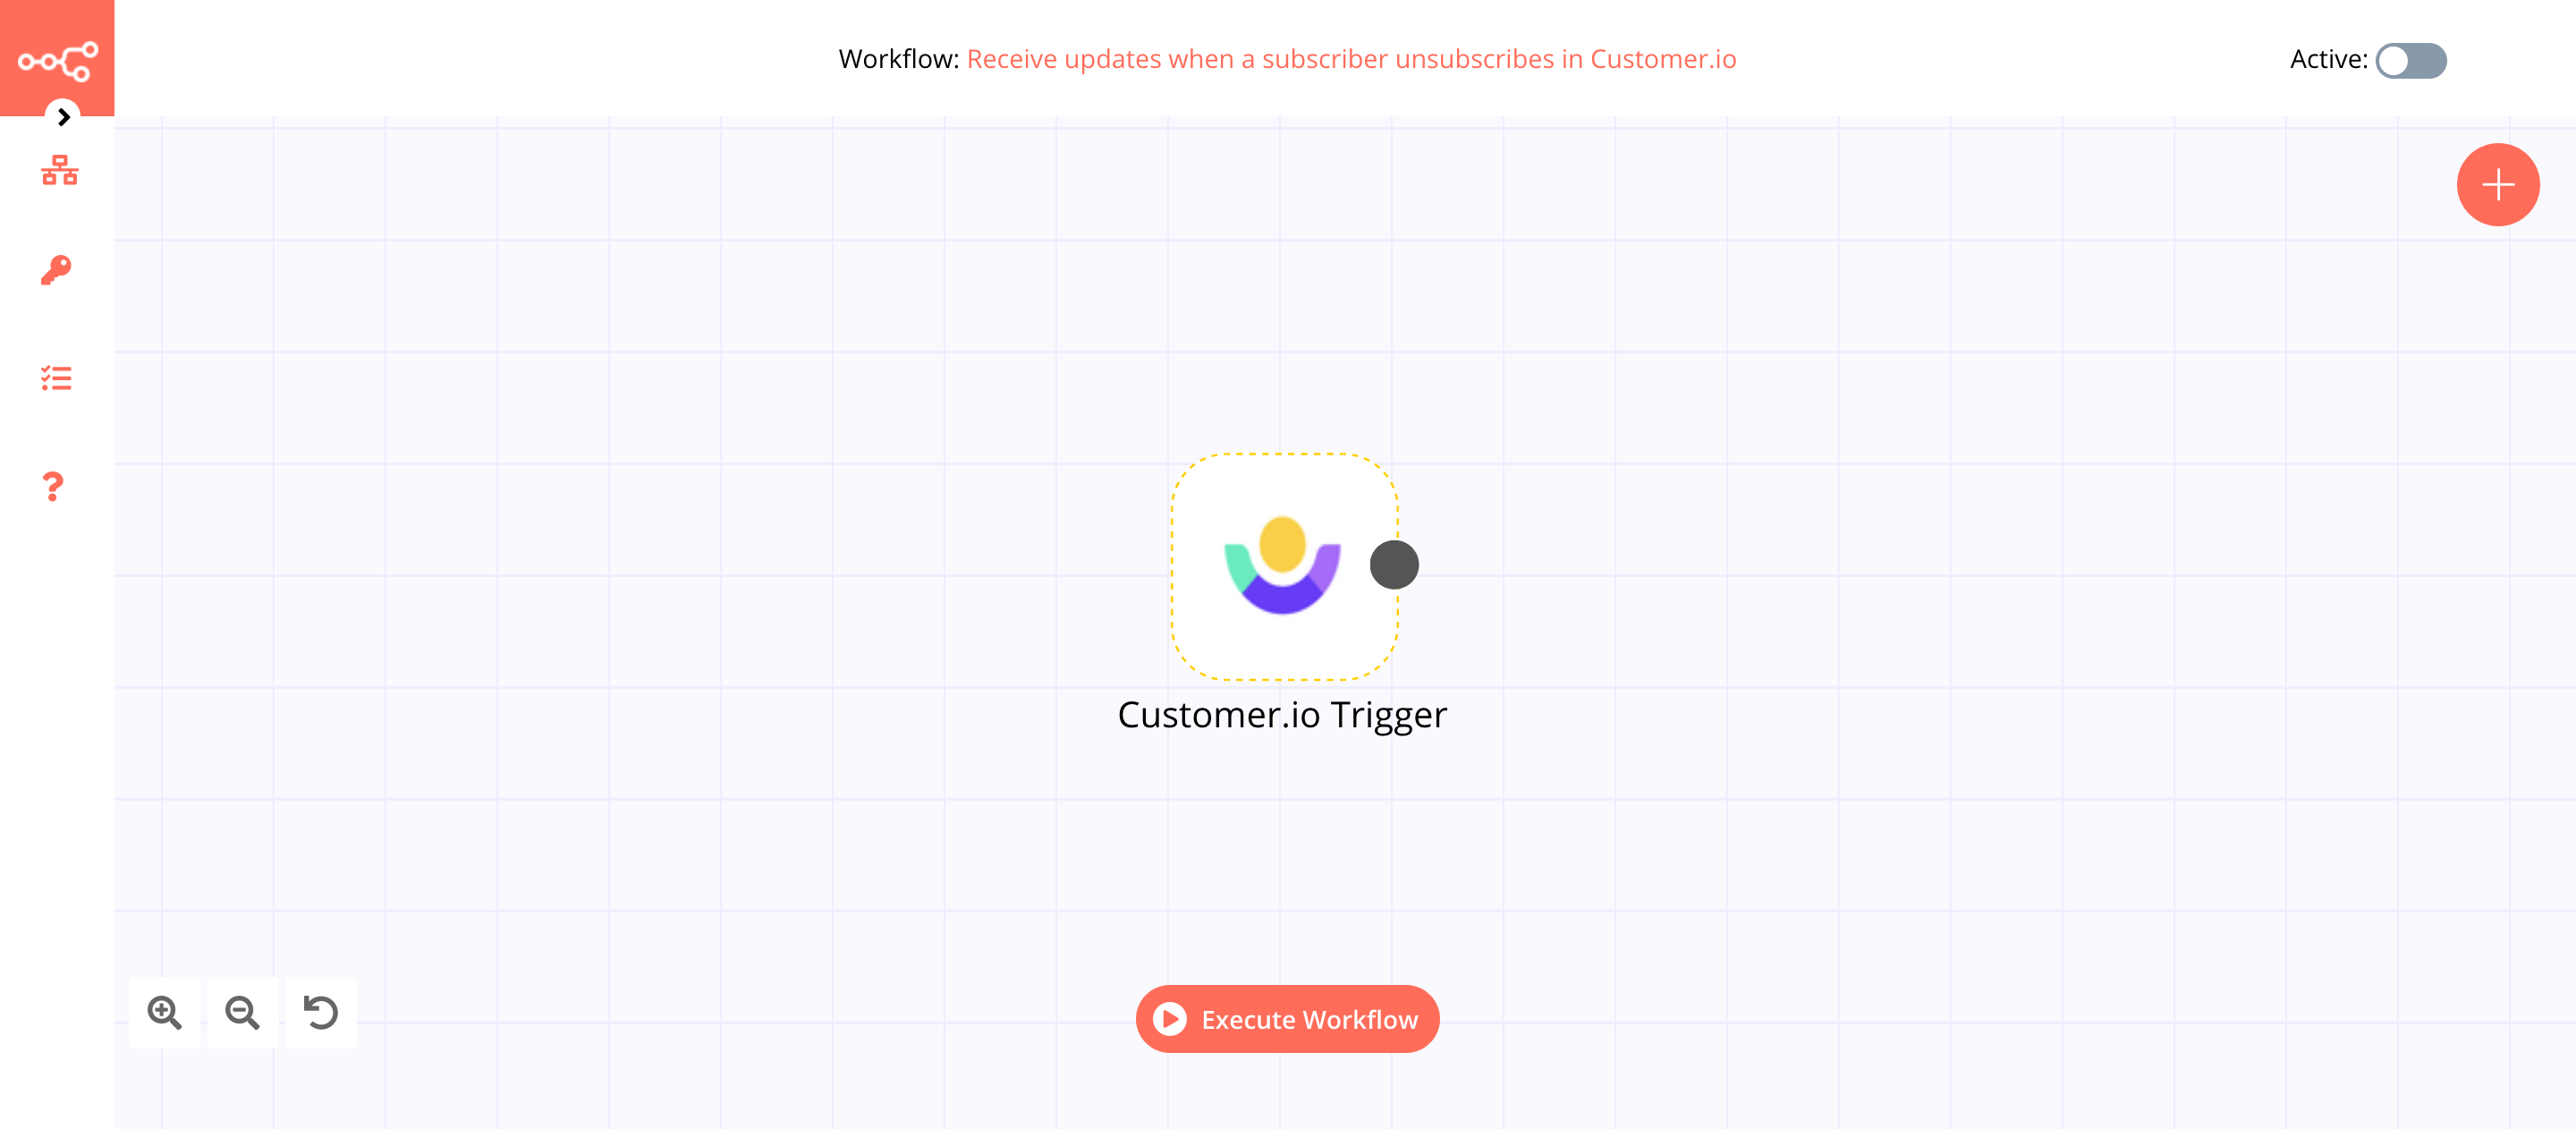 A workflow with the Customer.io Trigger node